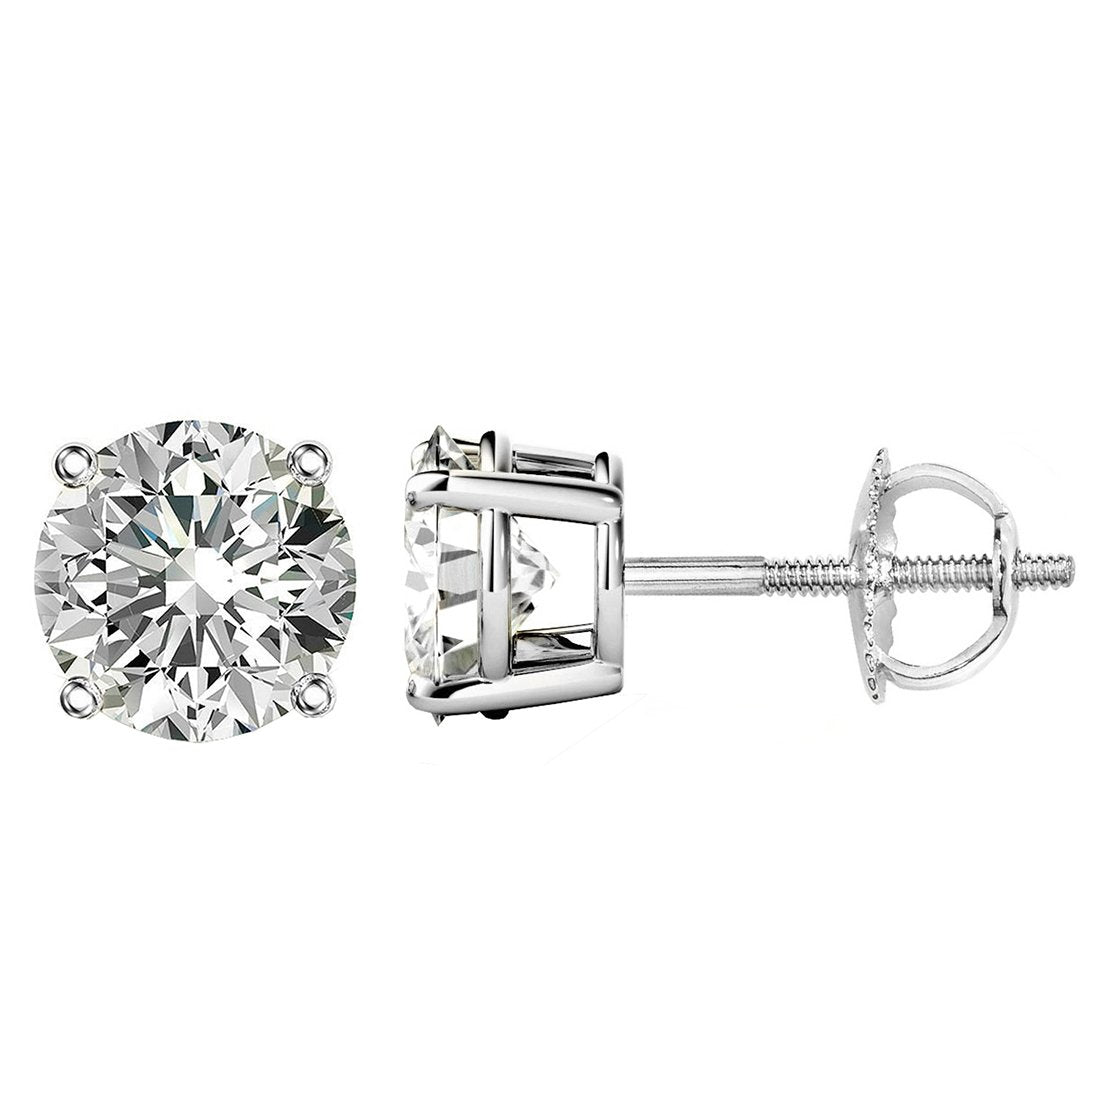 PLATINUM 950 4-PRONG ROUND. Choose From 0.25 CTW To 10.00 CTW